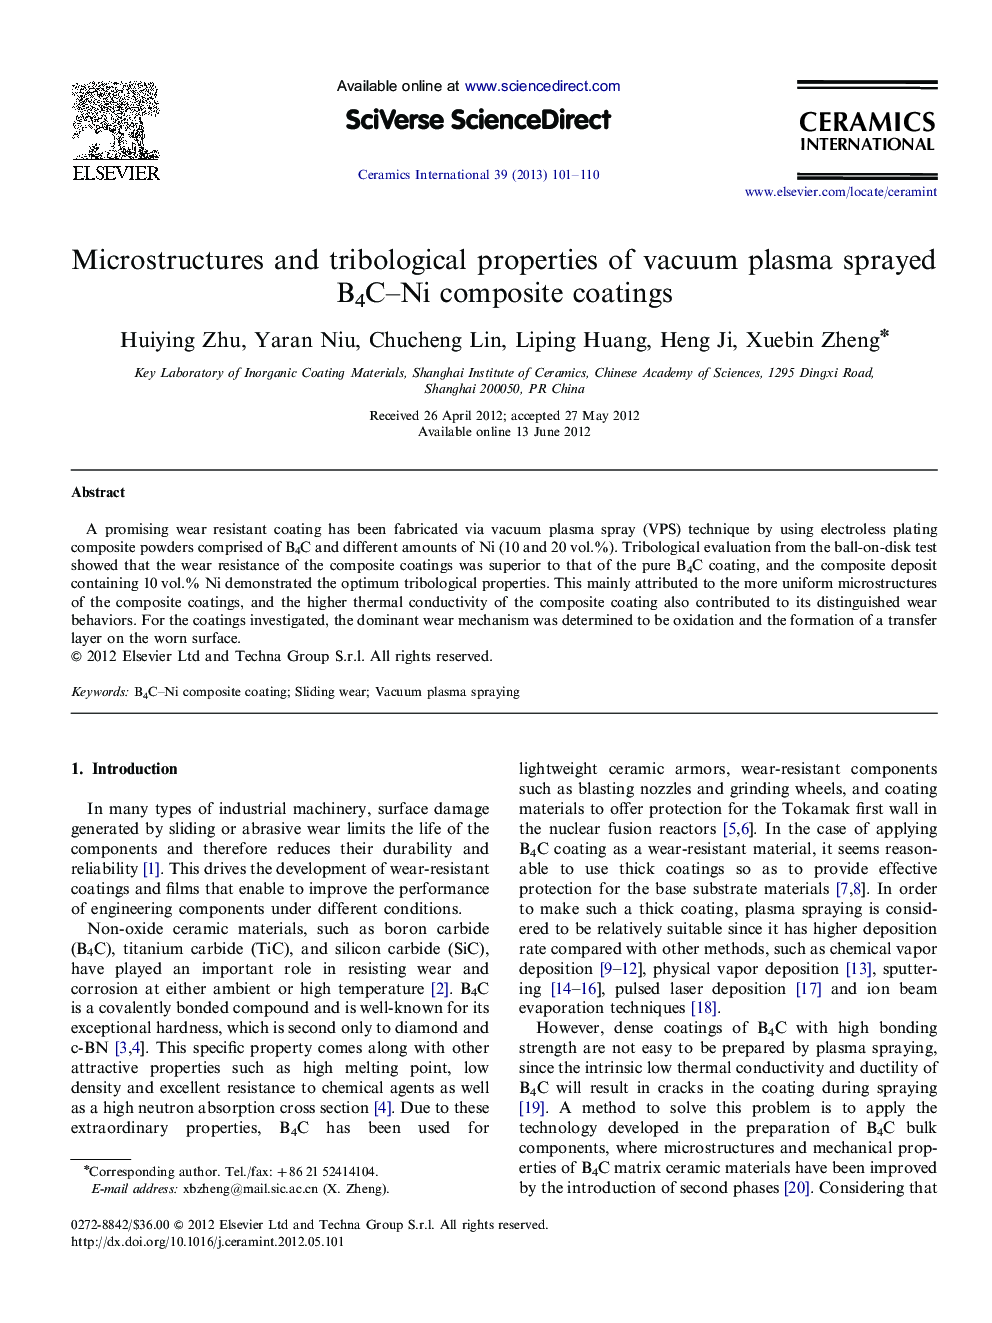 Microstructures and tribological properties of vacuum plasma sprayed B4C–Ni composite coatings